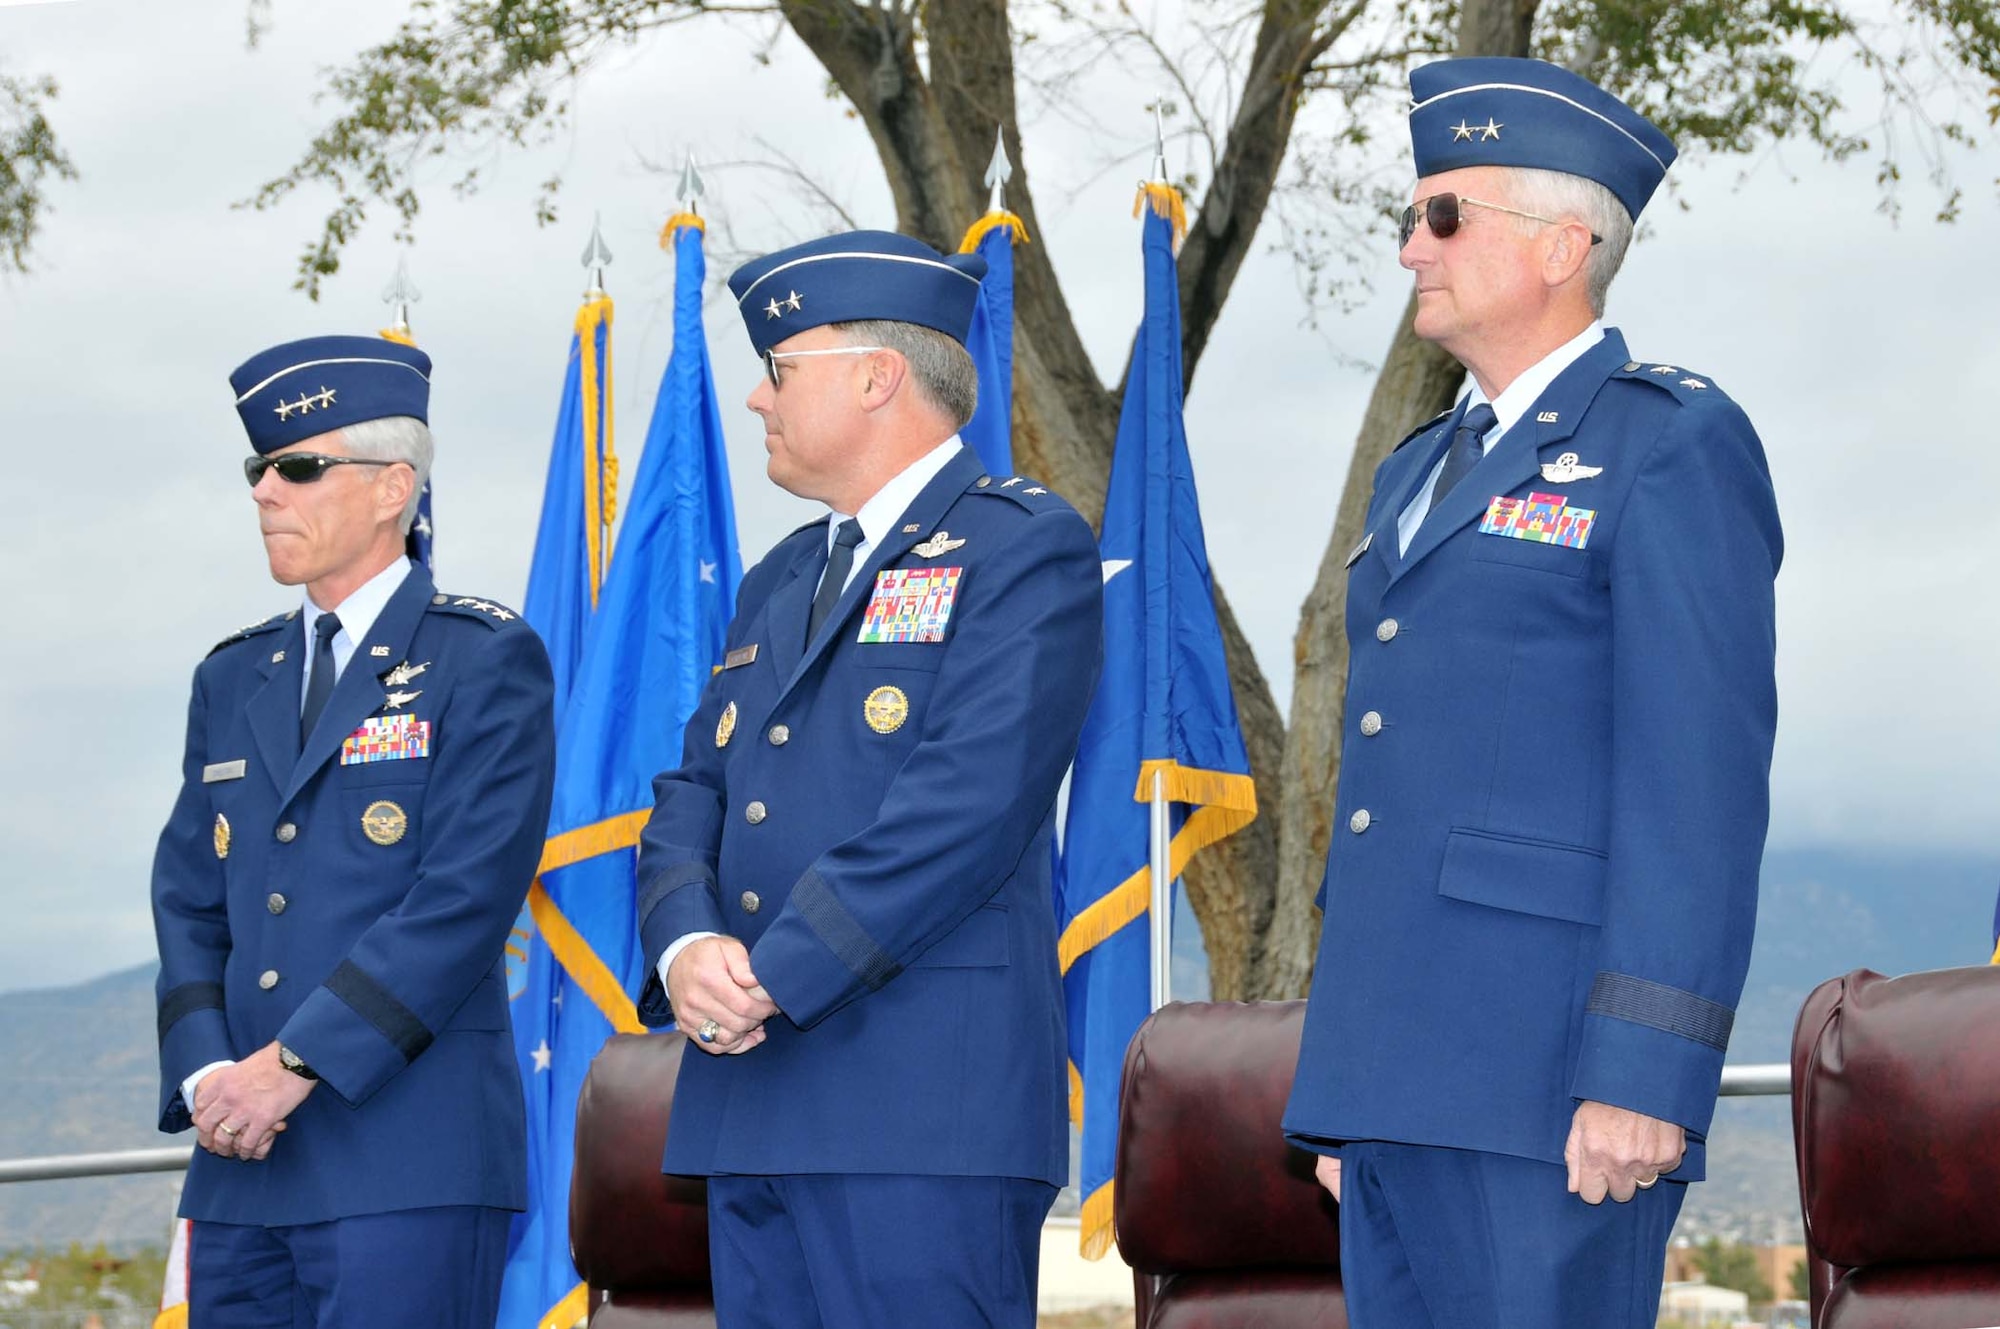 (Left to right) The official party for the Air Force Operational Test and Evaluation Center Change of Command included Assistant Vice Chief of Staff of the Air Force Lt. Gen. William L. Shelton, outgoing AFOTEC Commander Maj. Gen. Stephen T. Sargeant, and incoming AFOTEC Commander Maj. Gen. David J. Eichhorn.
